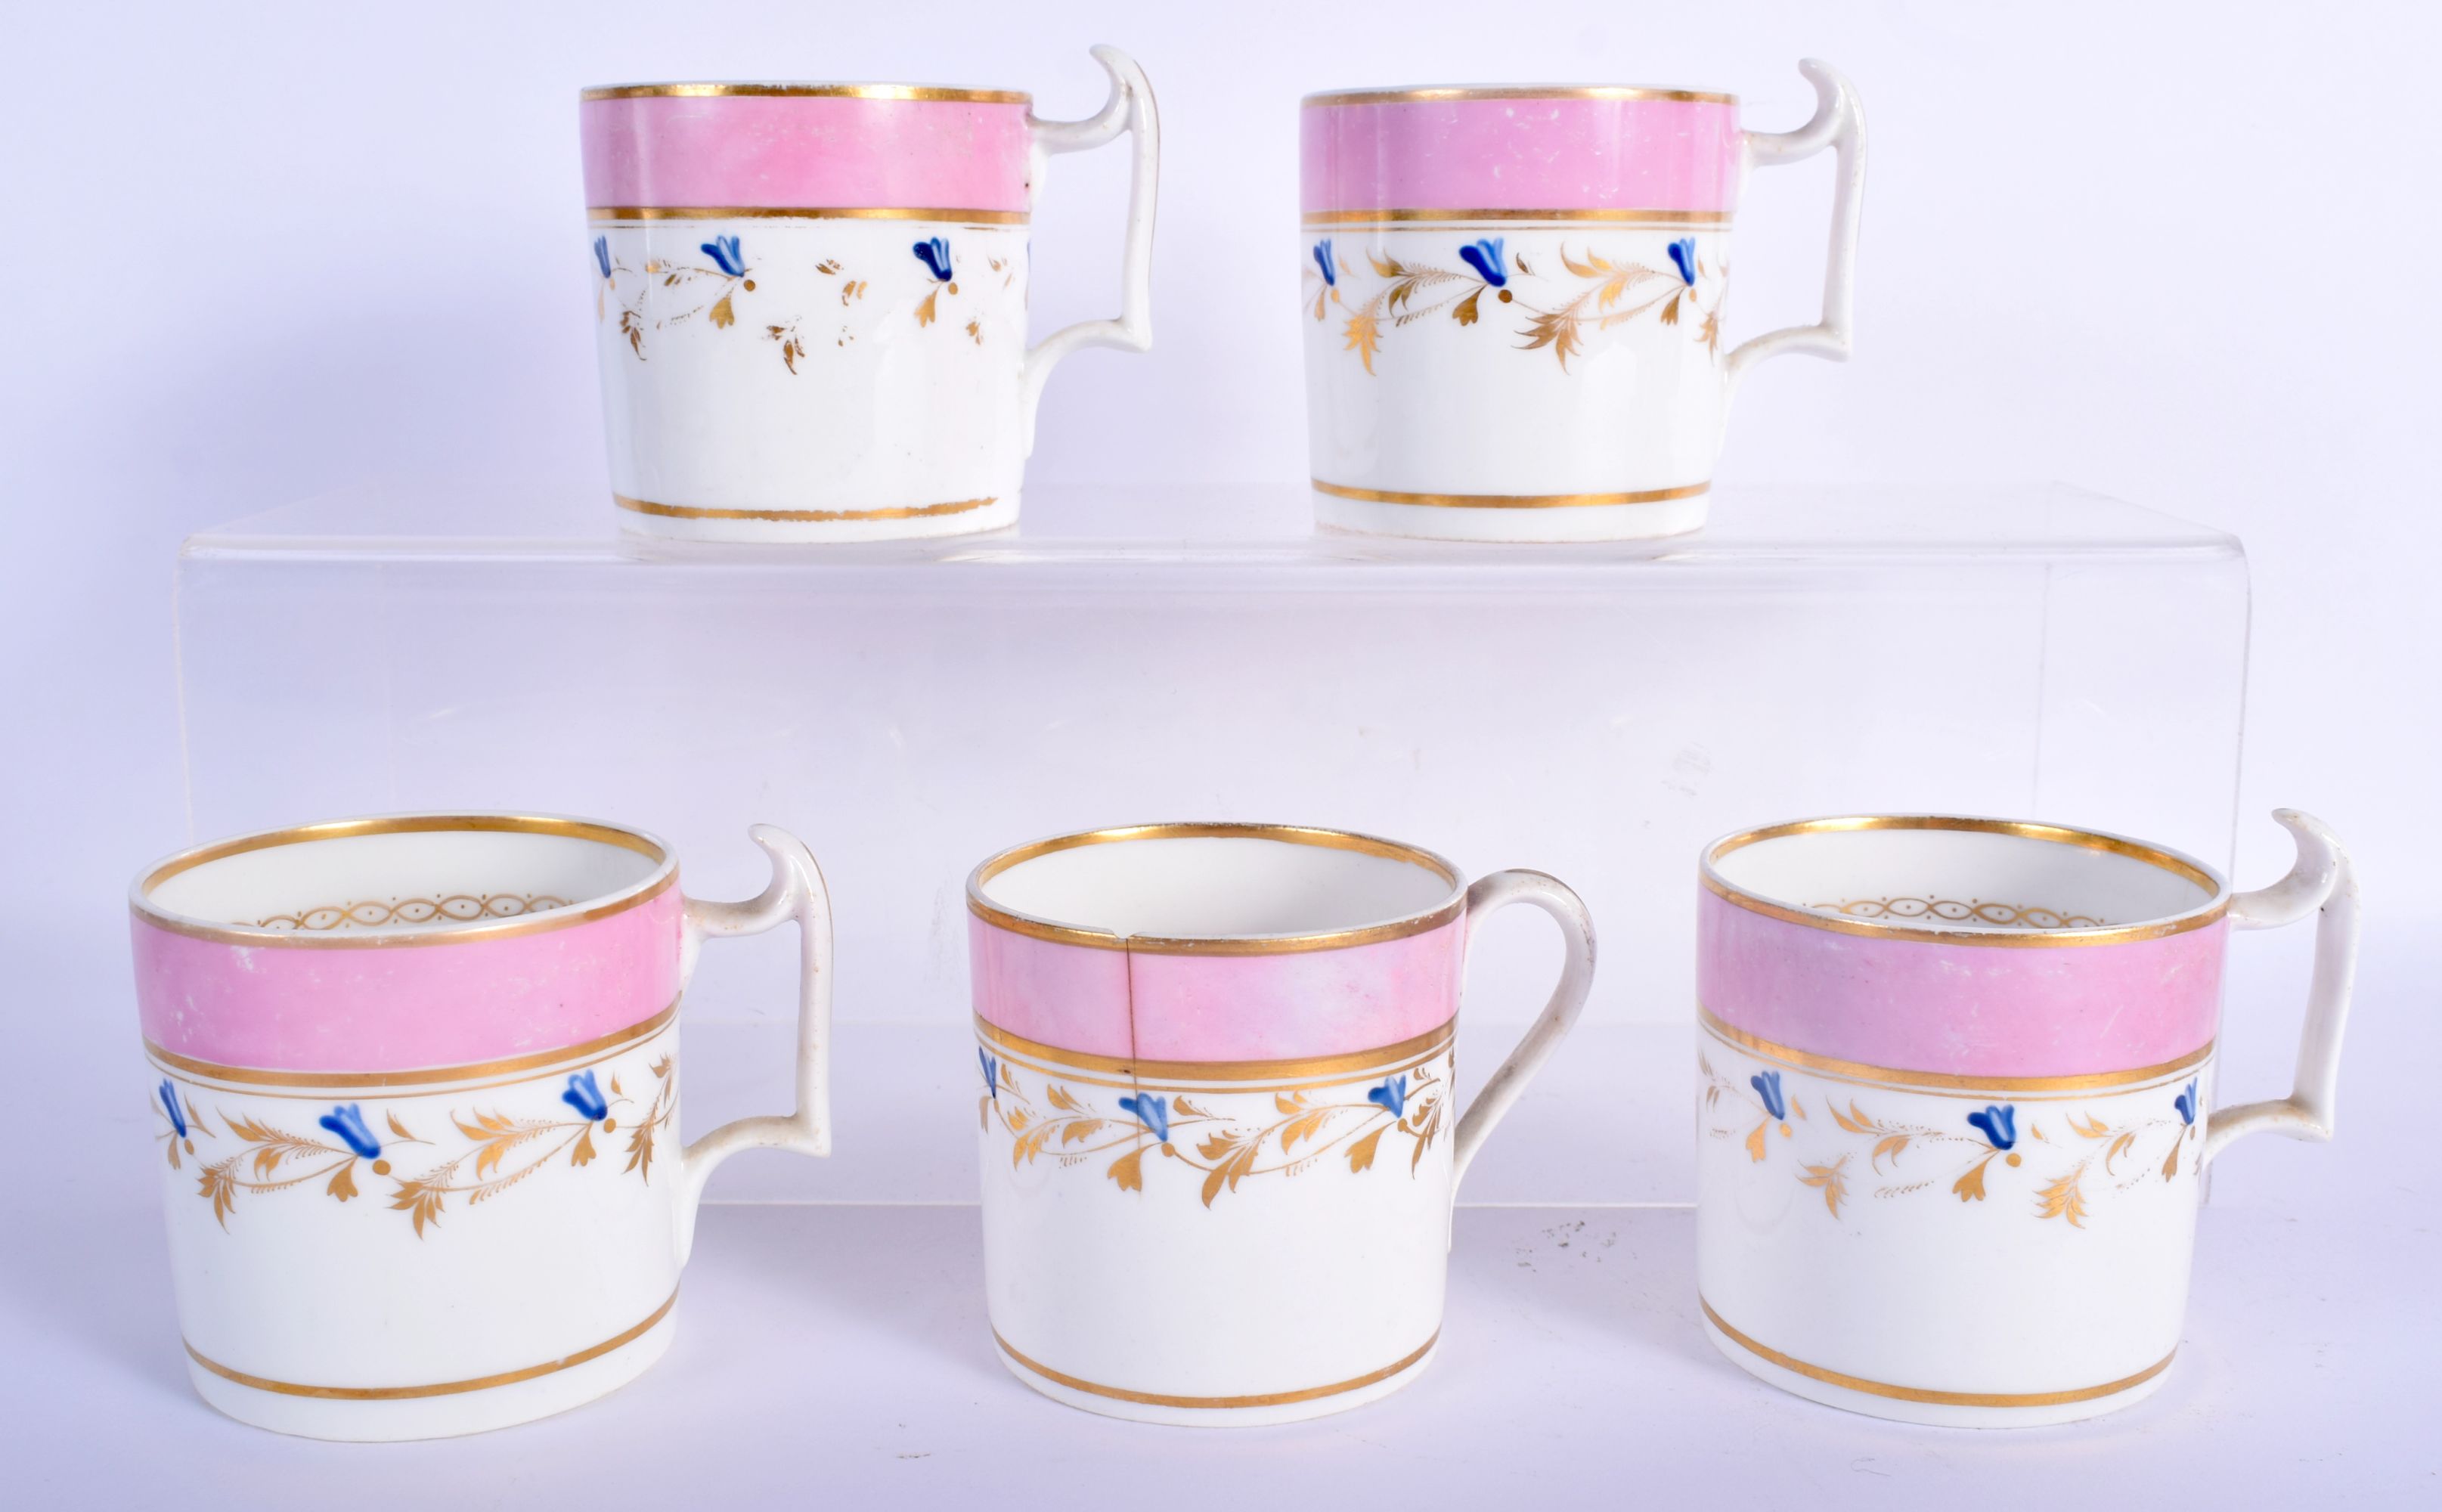 AN EARLY 19TH CENTURY DERBY SALMON GROUND PORCELAIN TEASET painted with blue and gilt scrolls. Large - Image 10 of 15